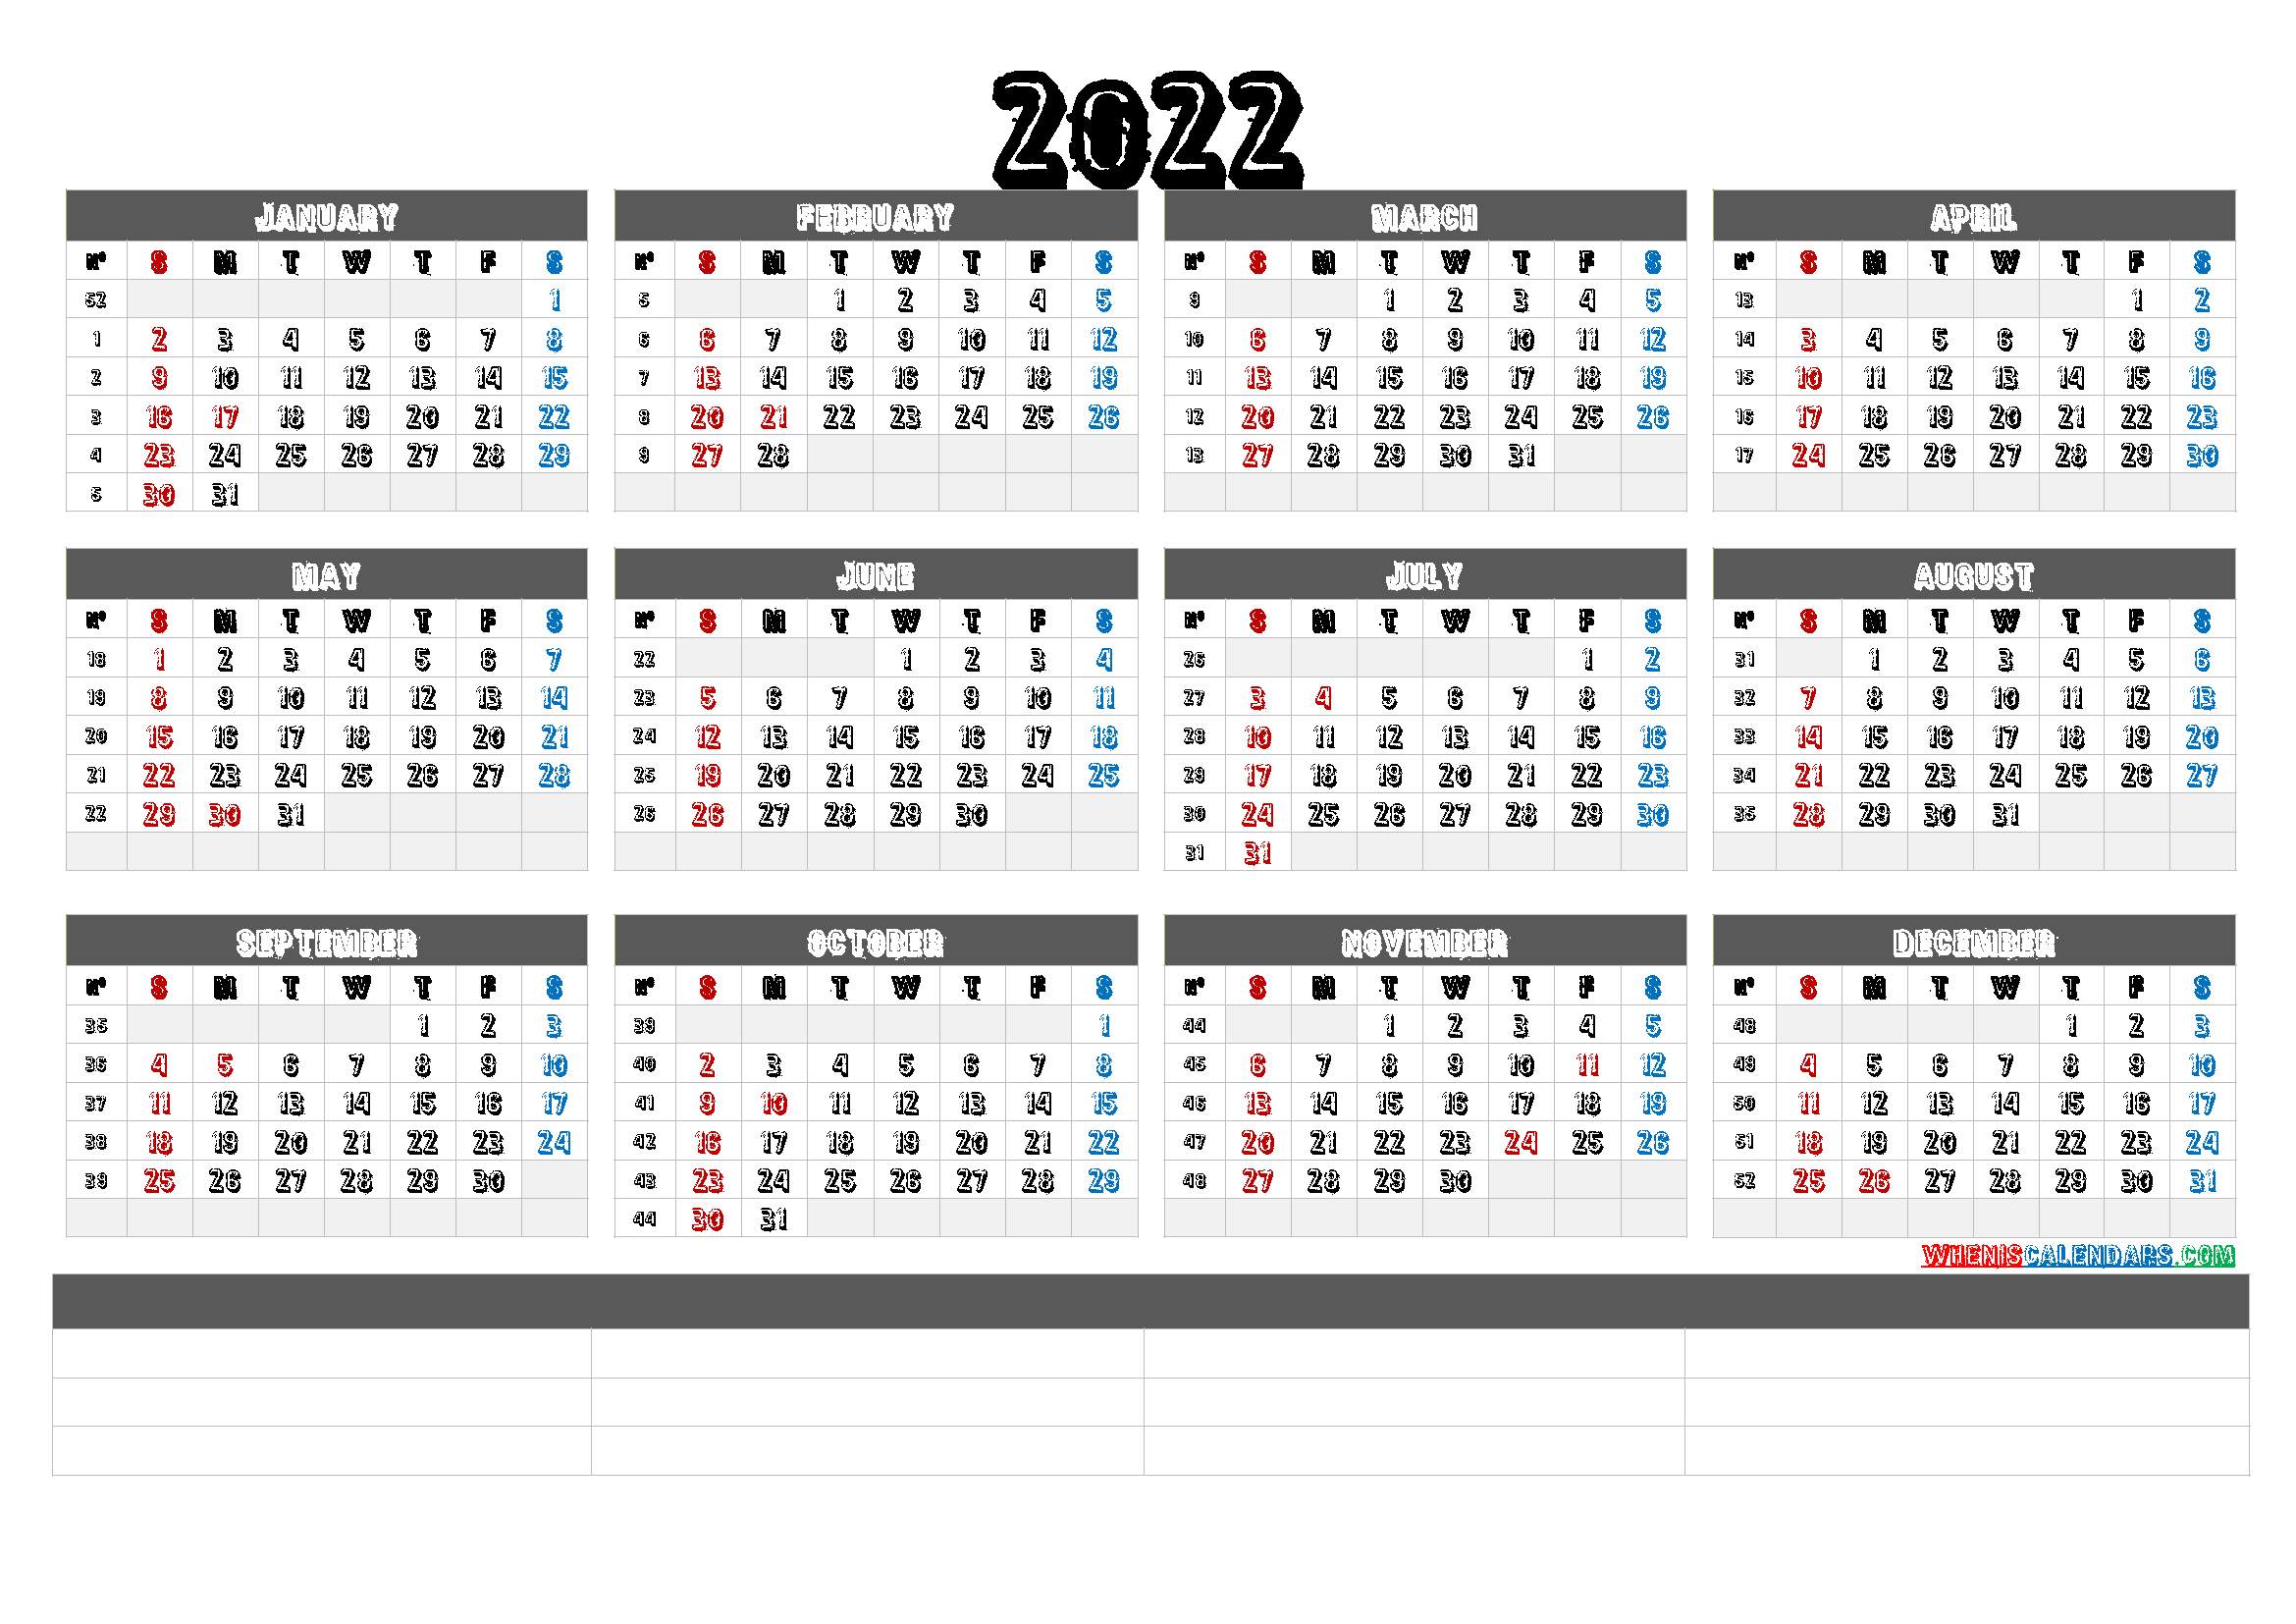 2022 Calendar With Week Numbers Printable  Calendraex within Next Year Calendar 2022